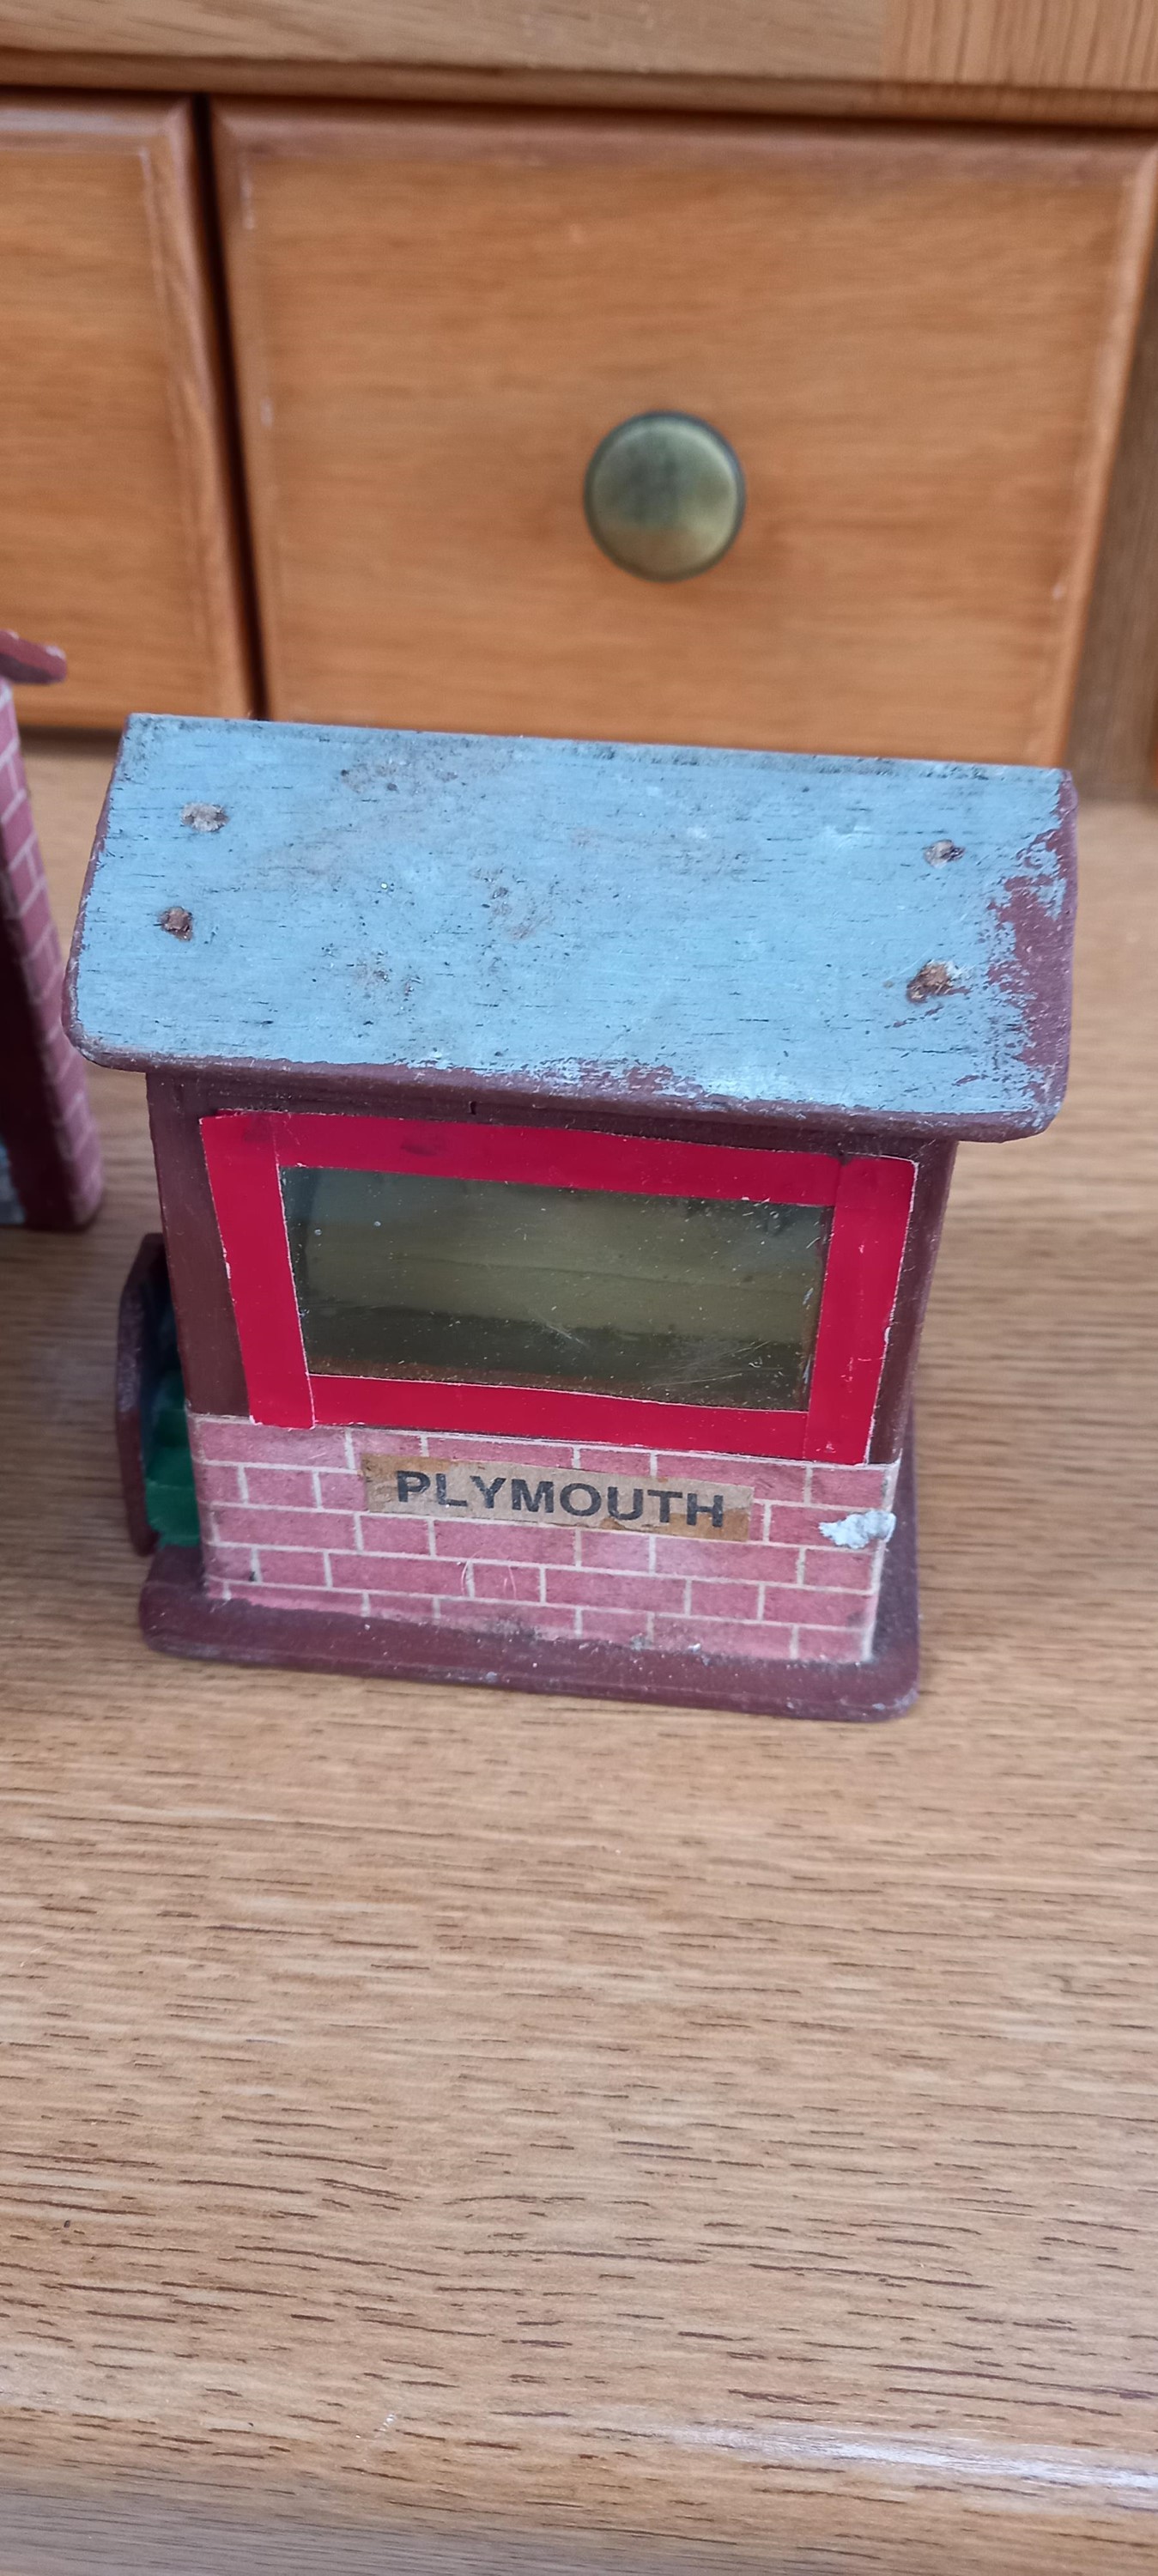 A vintage toy piano, model railway buildings and other toys. - Image 5 of 5